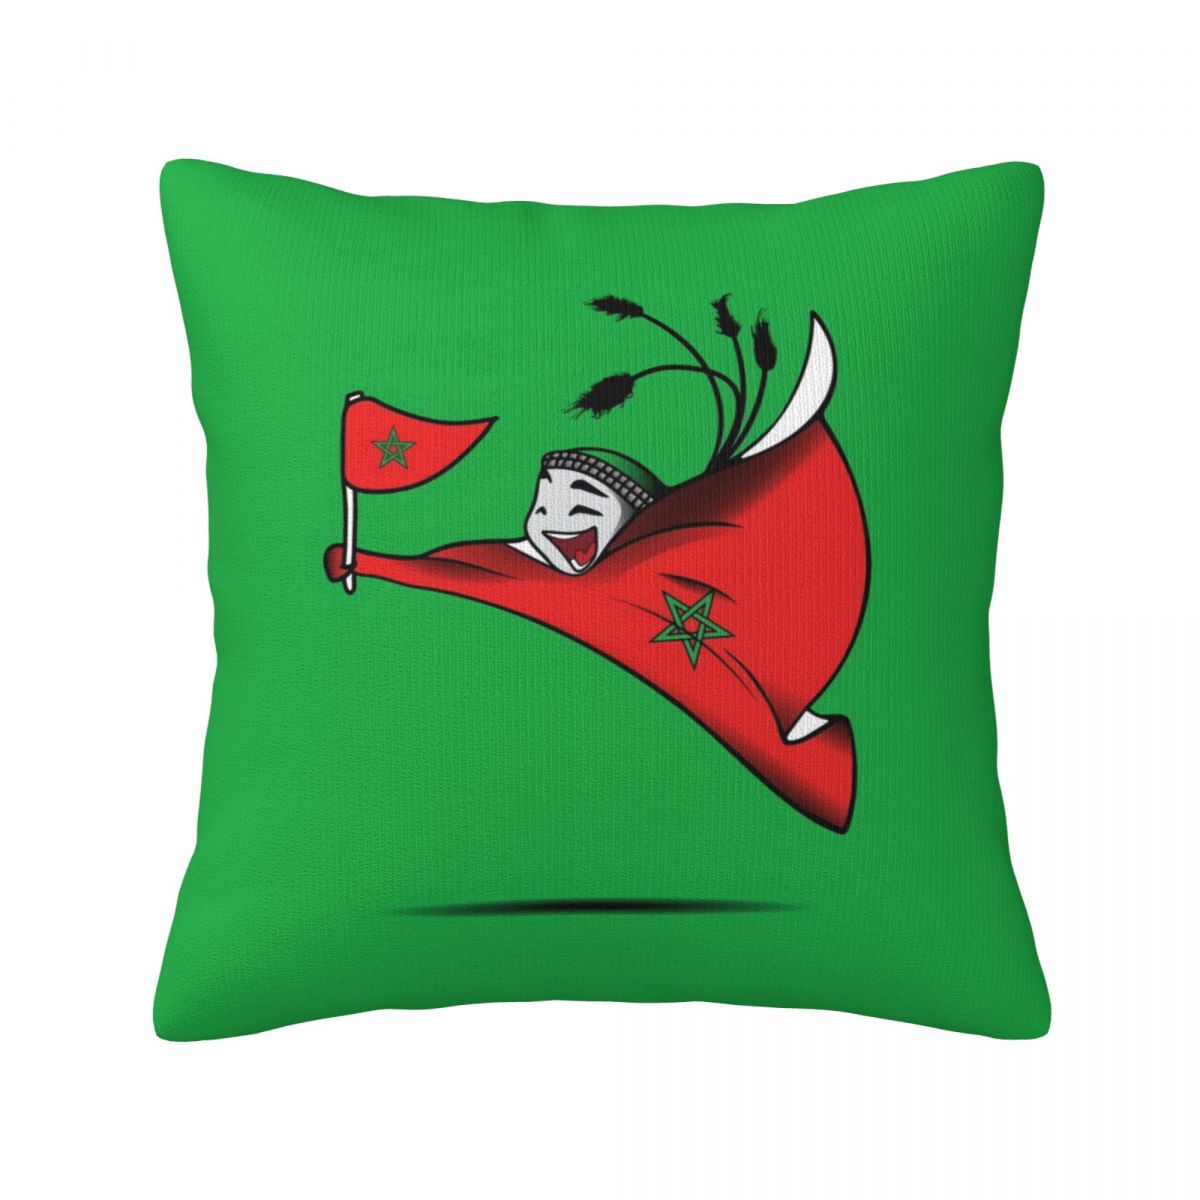 Morocco World Cup 2022 Mascot Decorative Throw Pillow